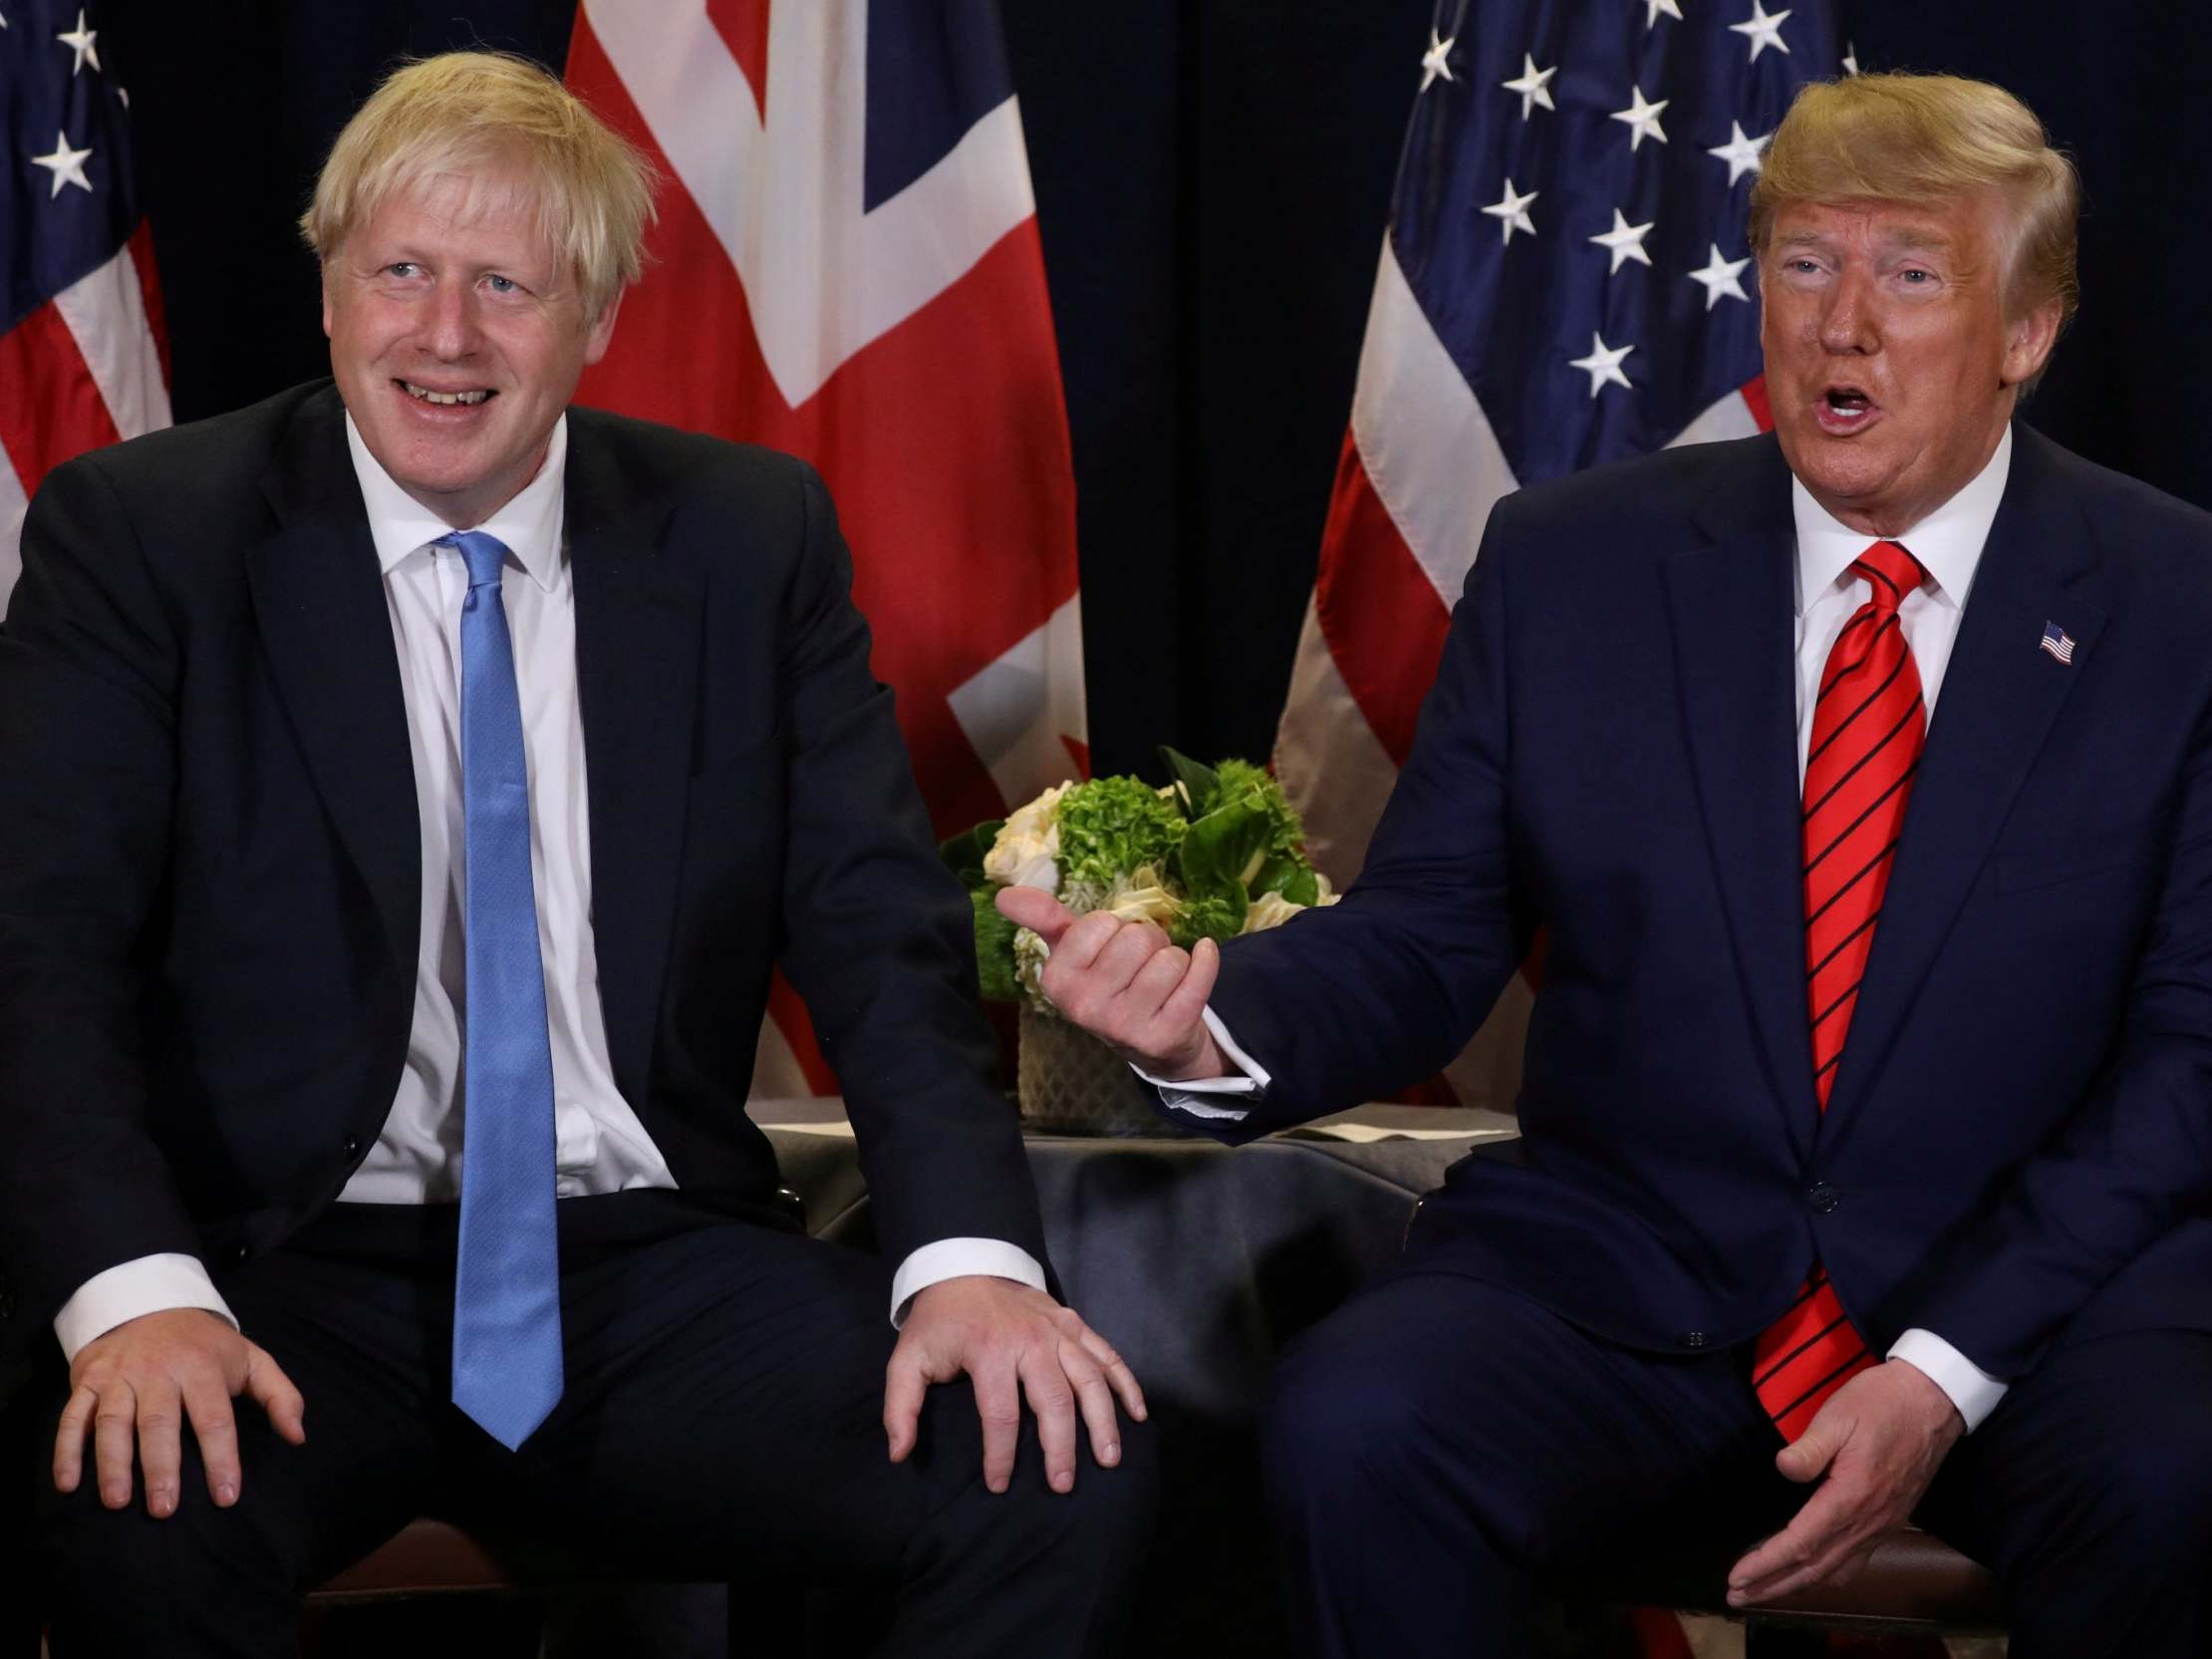 Boris Johnson, Donald Trump and the issue of Brexit have loomed large over the last few years